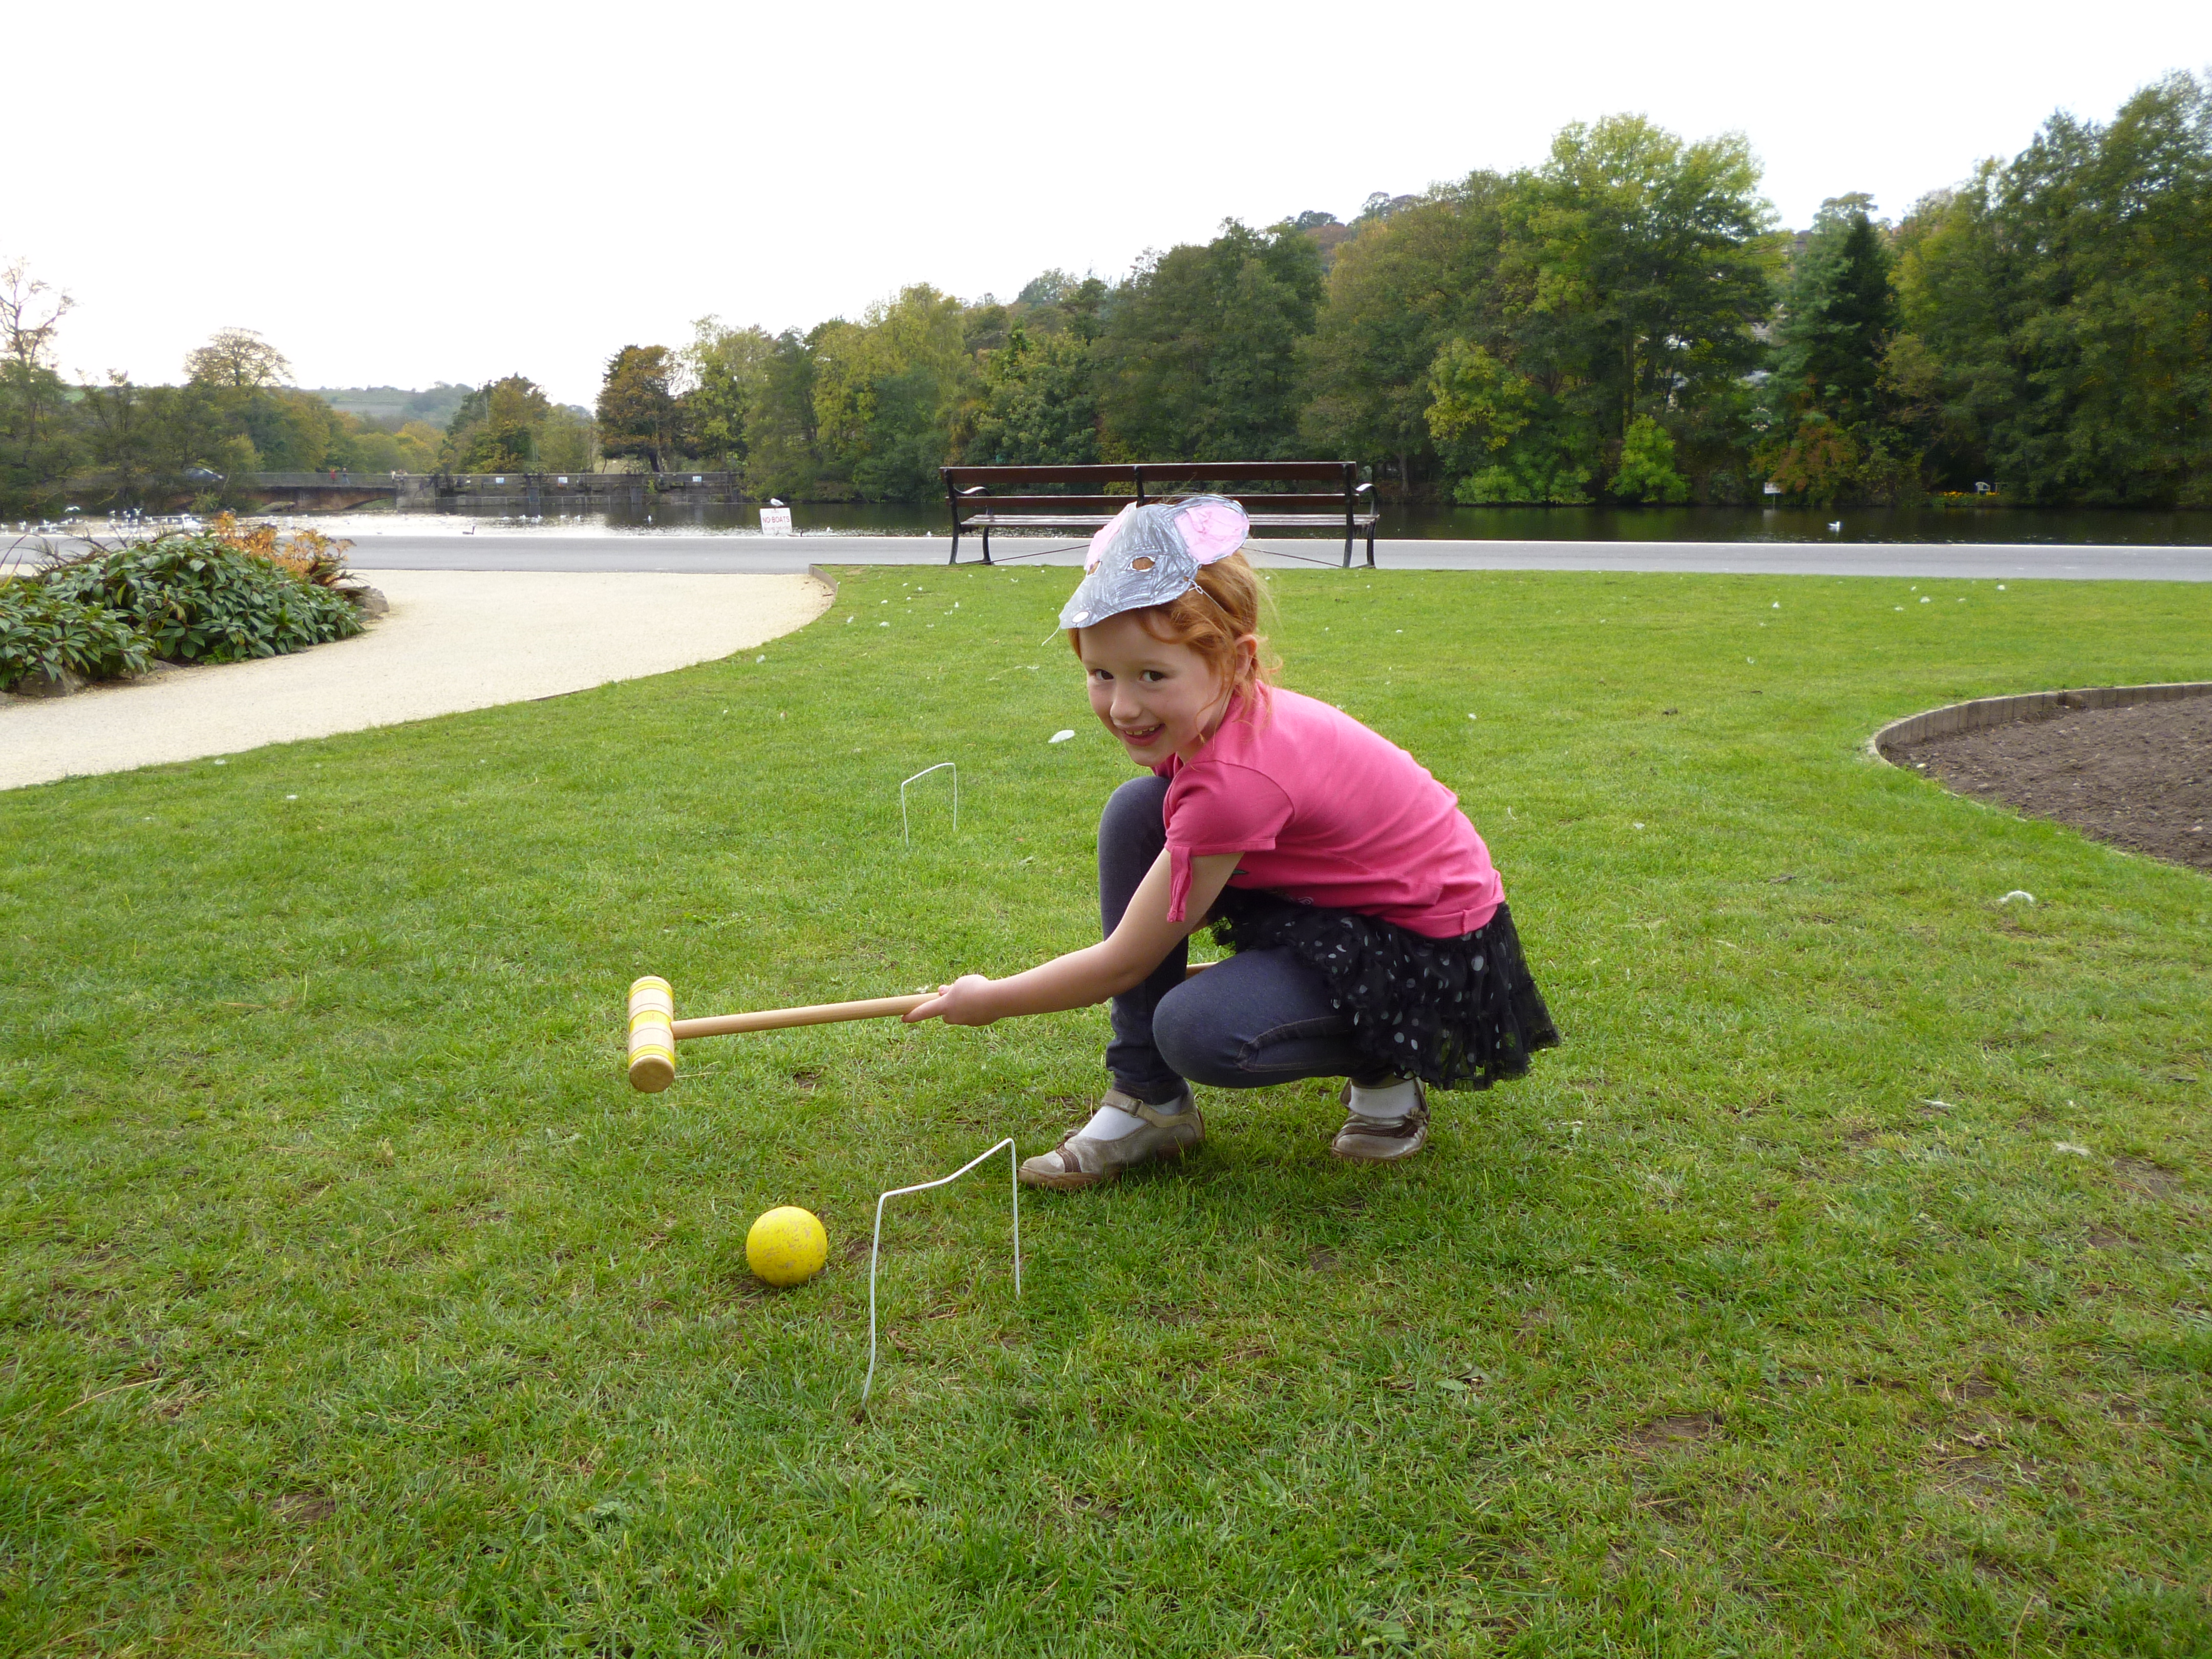 Learning to play croquet